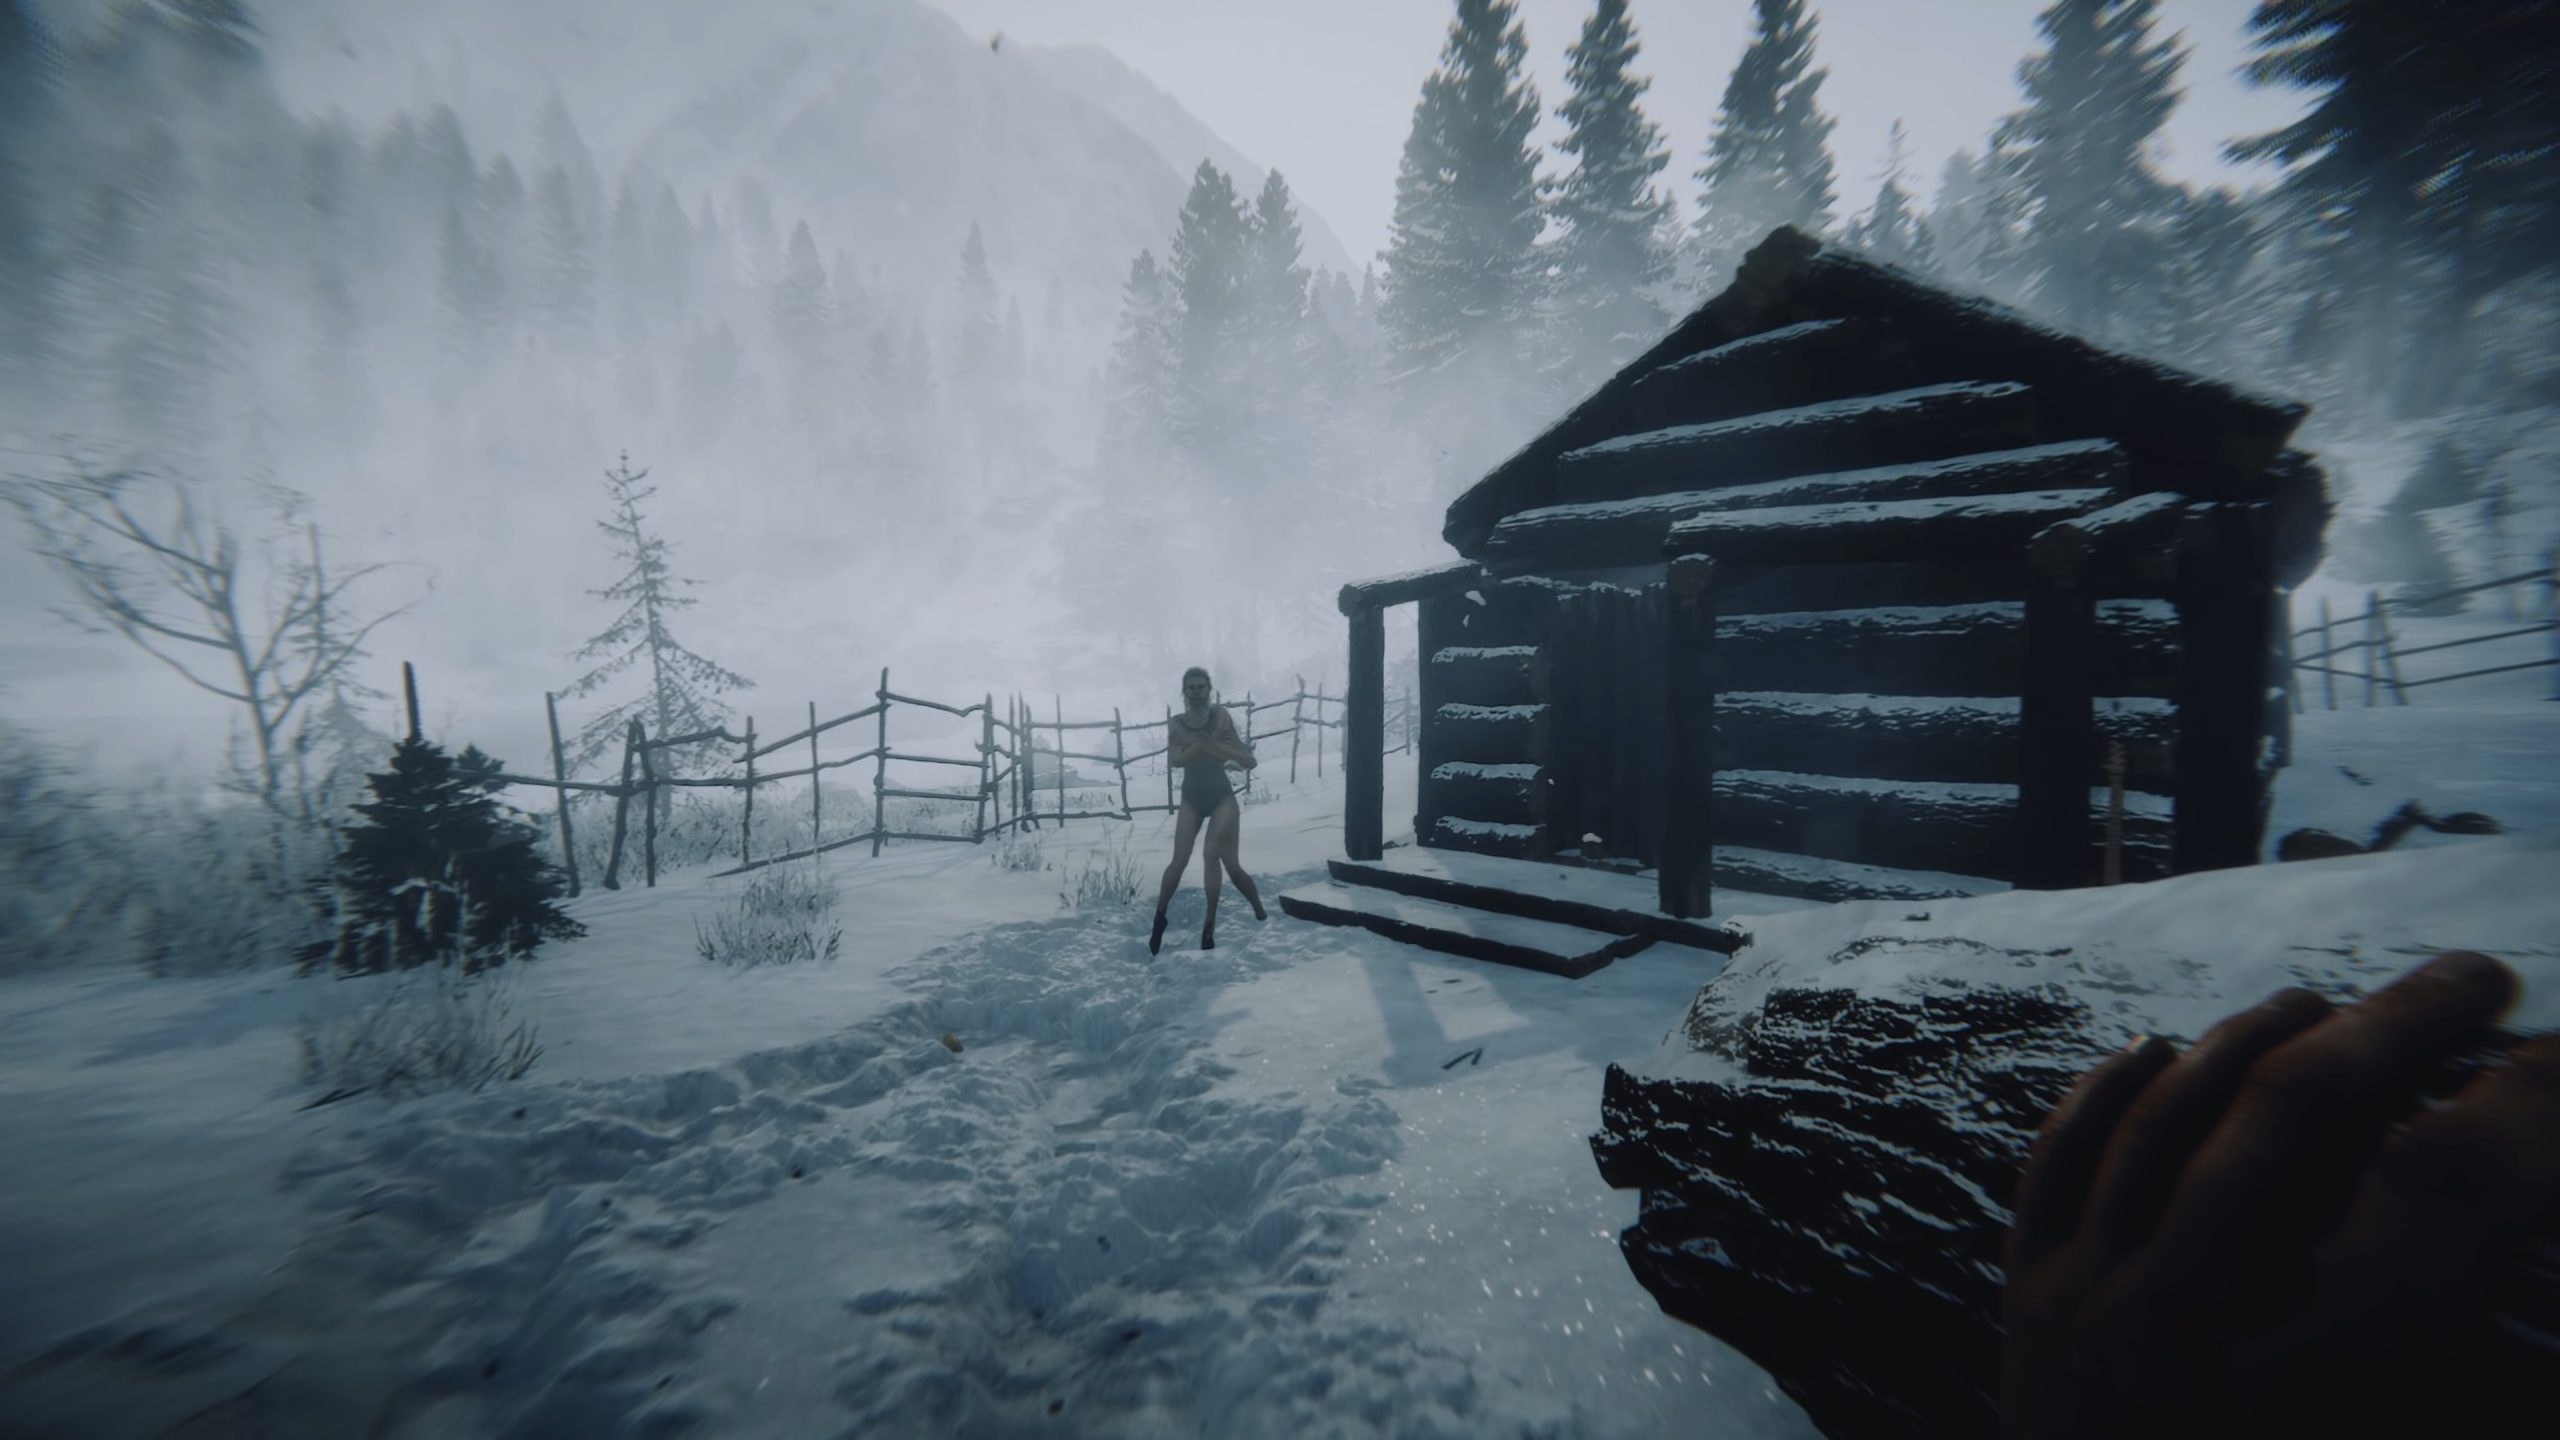 Sons of the Forest' Boasts New AI Companion, Revamped Building